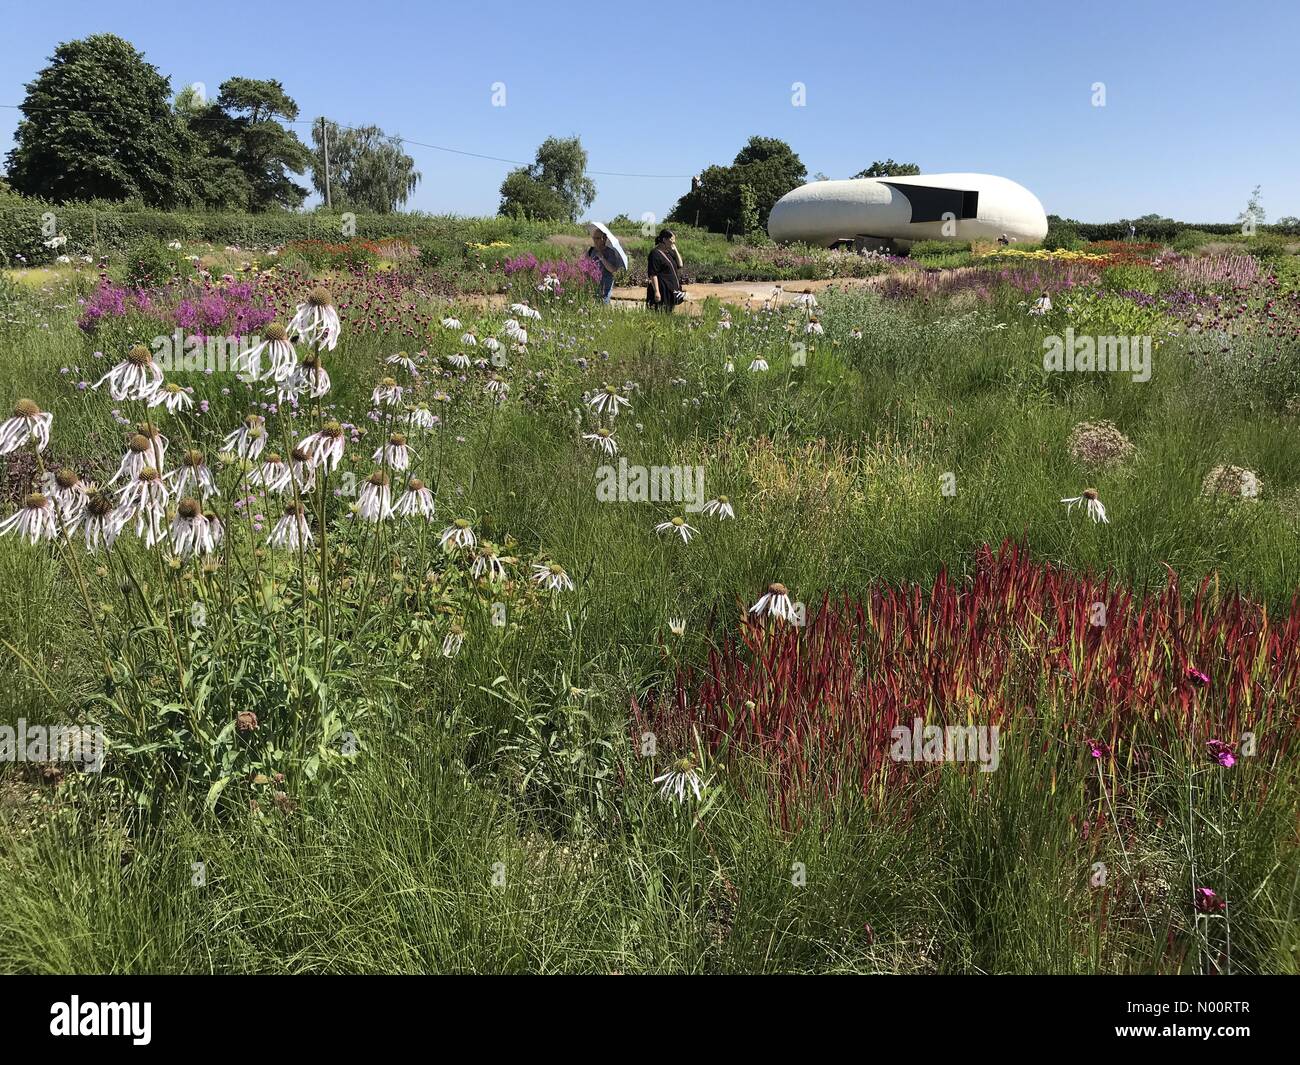 Somerset, UK, 30 June 2018. UK Weather : The heatwave continues as people enjoy the sizzling sunshine in Oudolf Field, designed by Piet Oudolf, Hauser & Wirth, Bruton, Somerset, England Credit: Josie Elias/StockimoNews/Alamy Live News Stock Photo